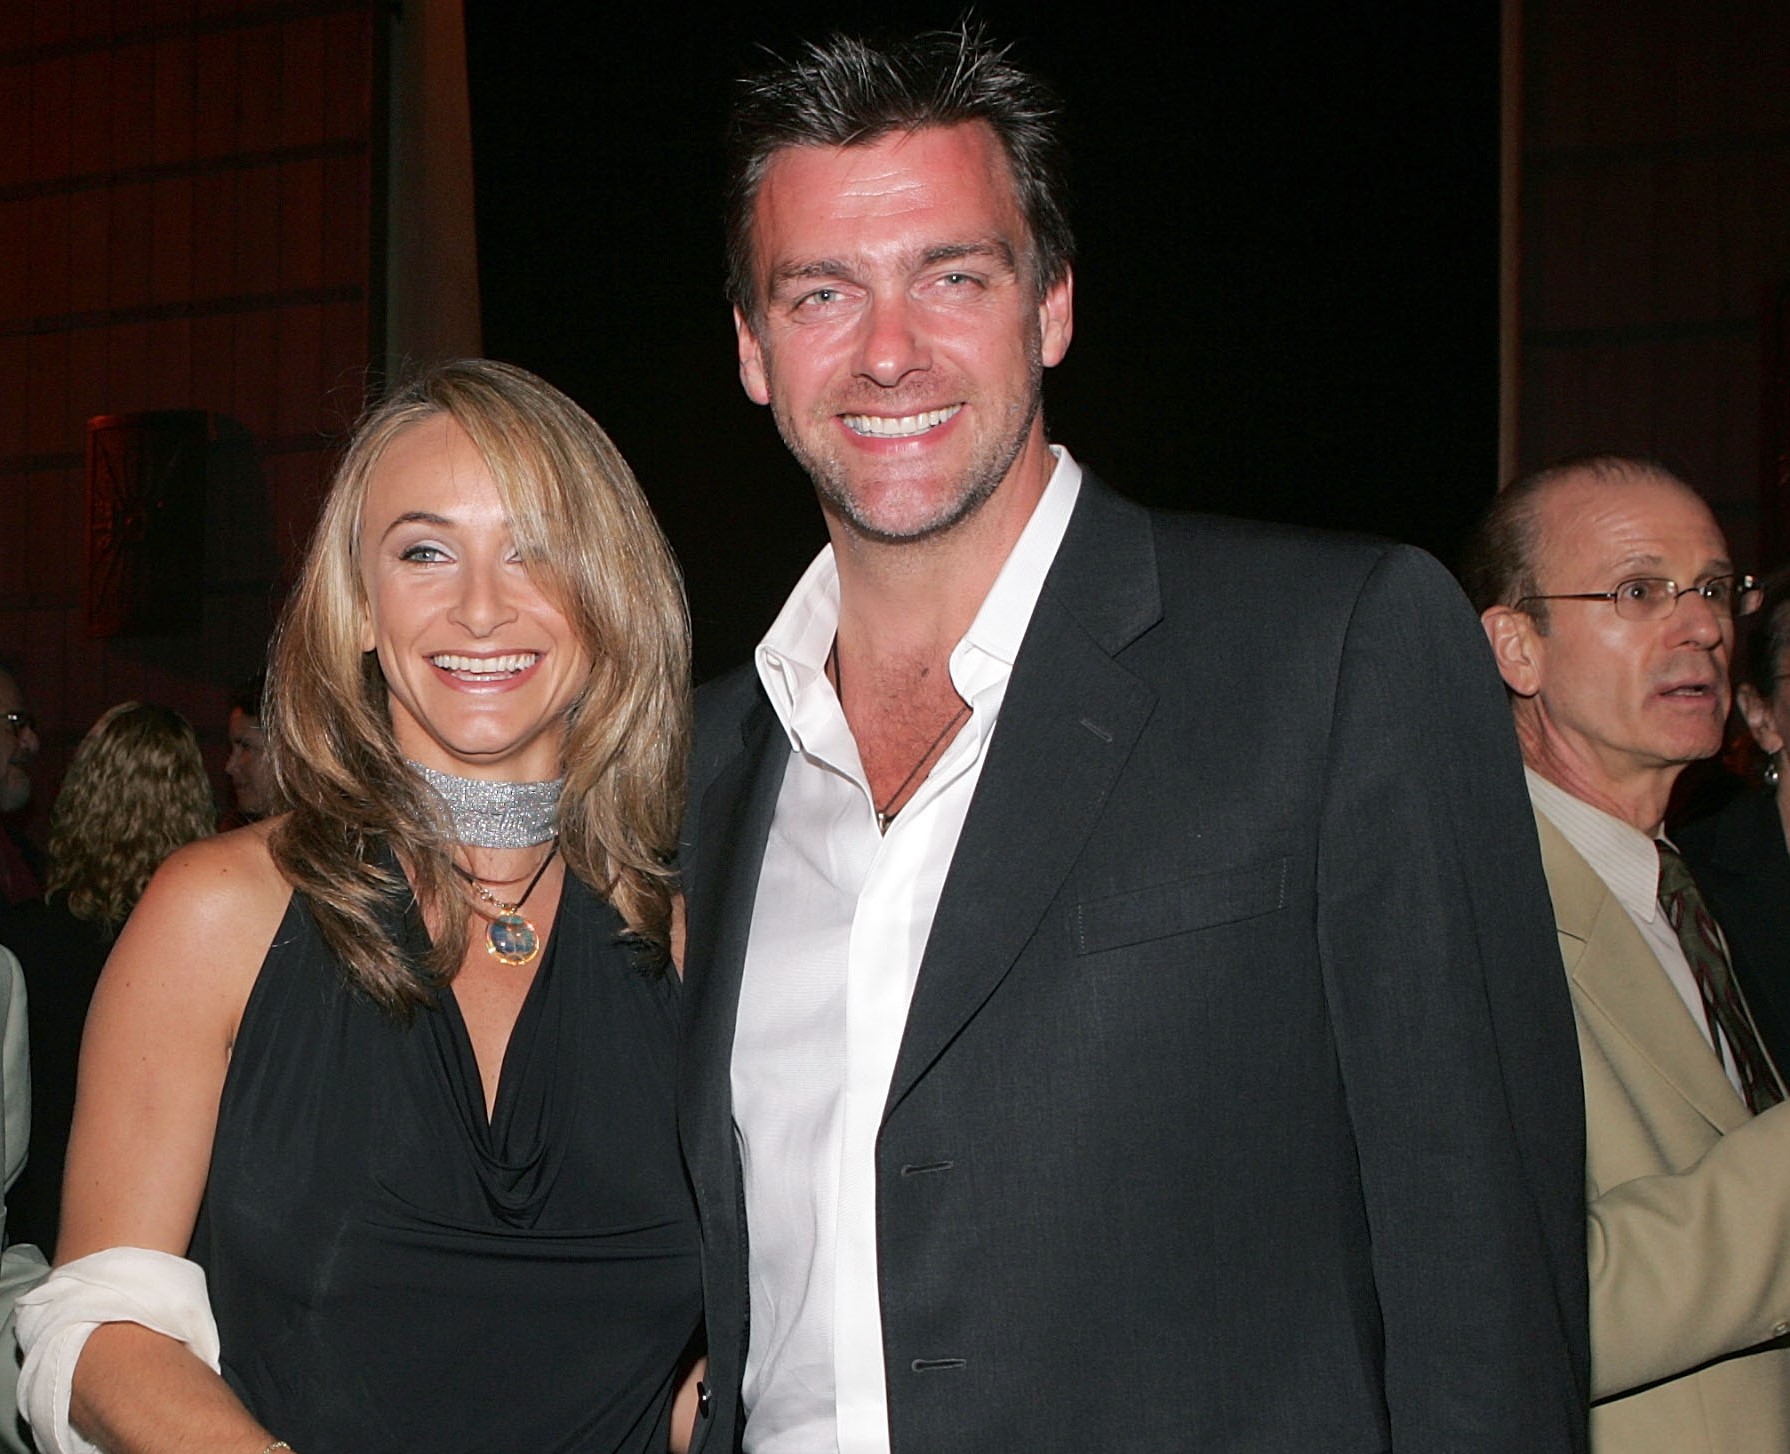 Elisabetta Caraccia and Ray Stevenson at the after-party for HBO's "Rome" at the Wadsworth Theater, on August 24, 2005, in Los Angeles, California.| Source: Getty Images